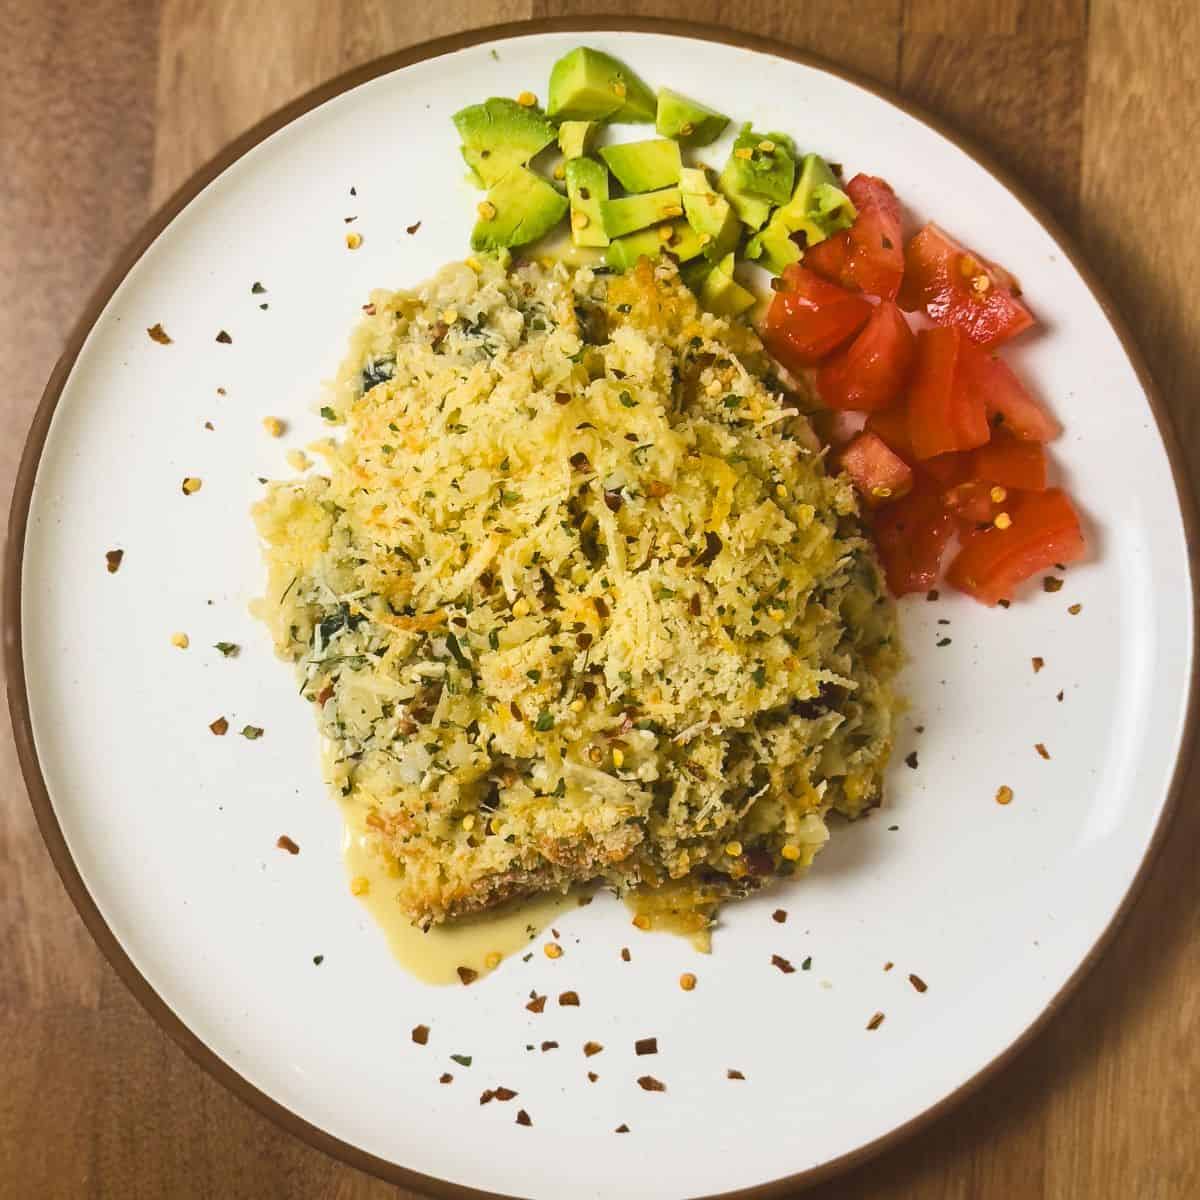 Plated serving of keto chicken and cauliflower rice casserole garnished with avocado and tomato